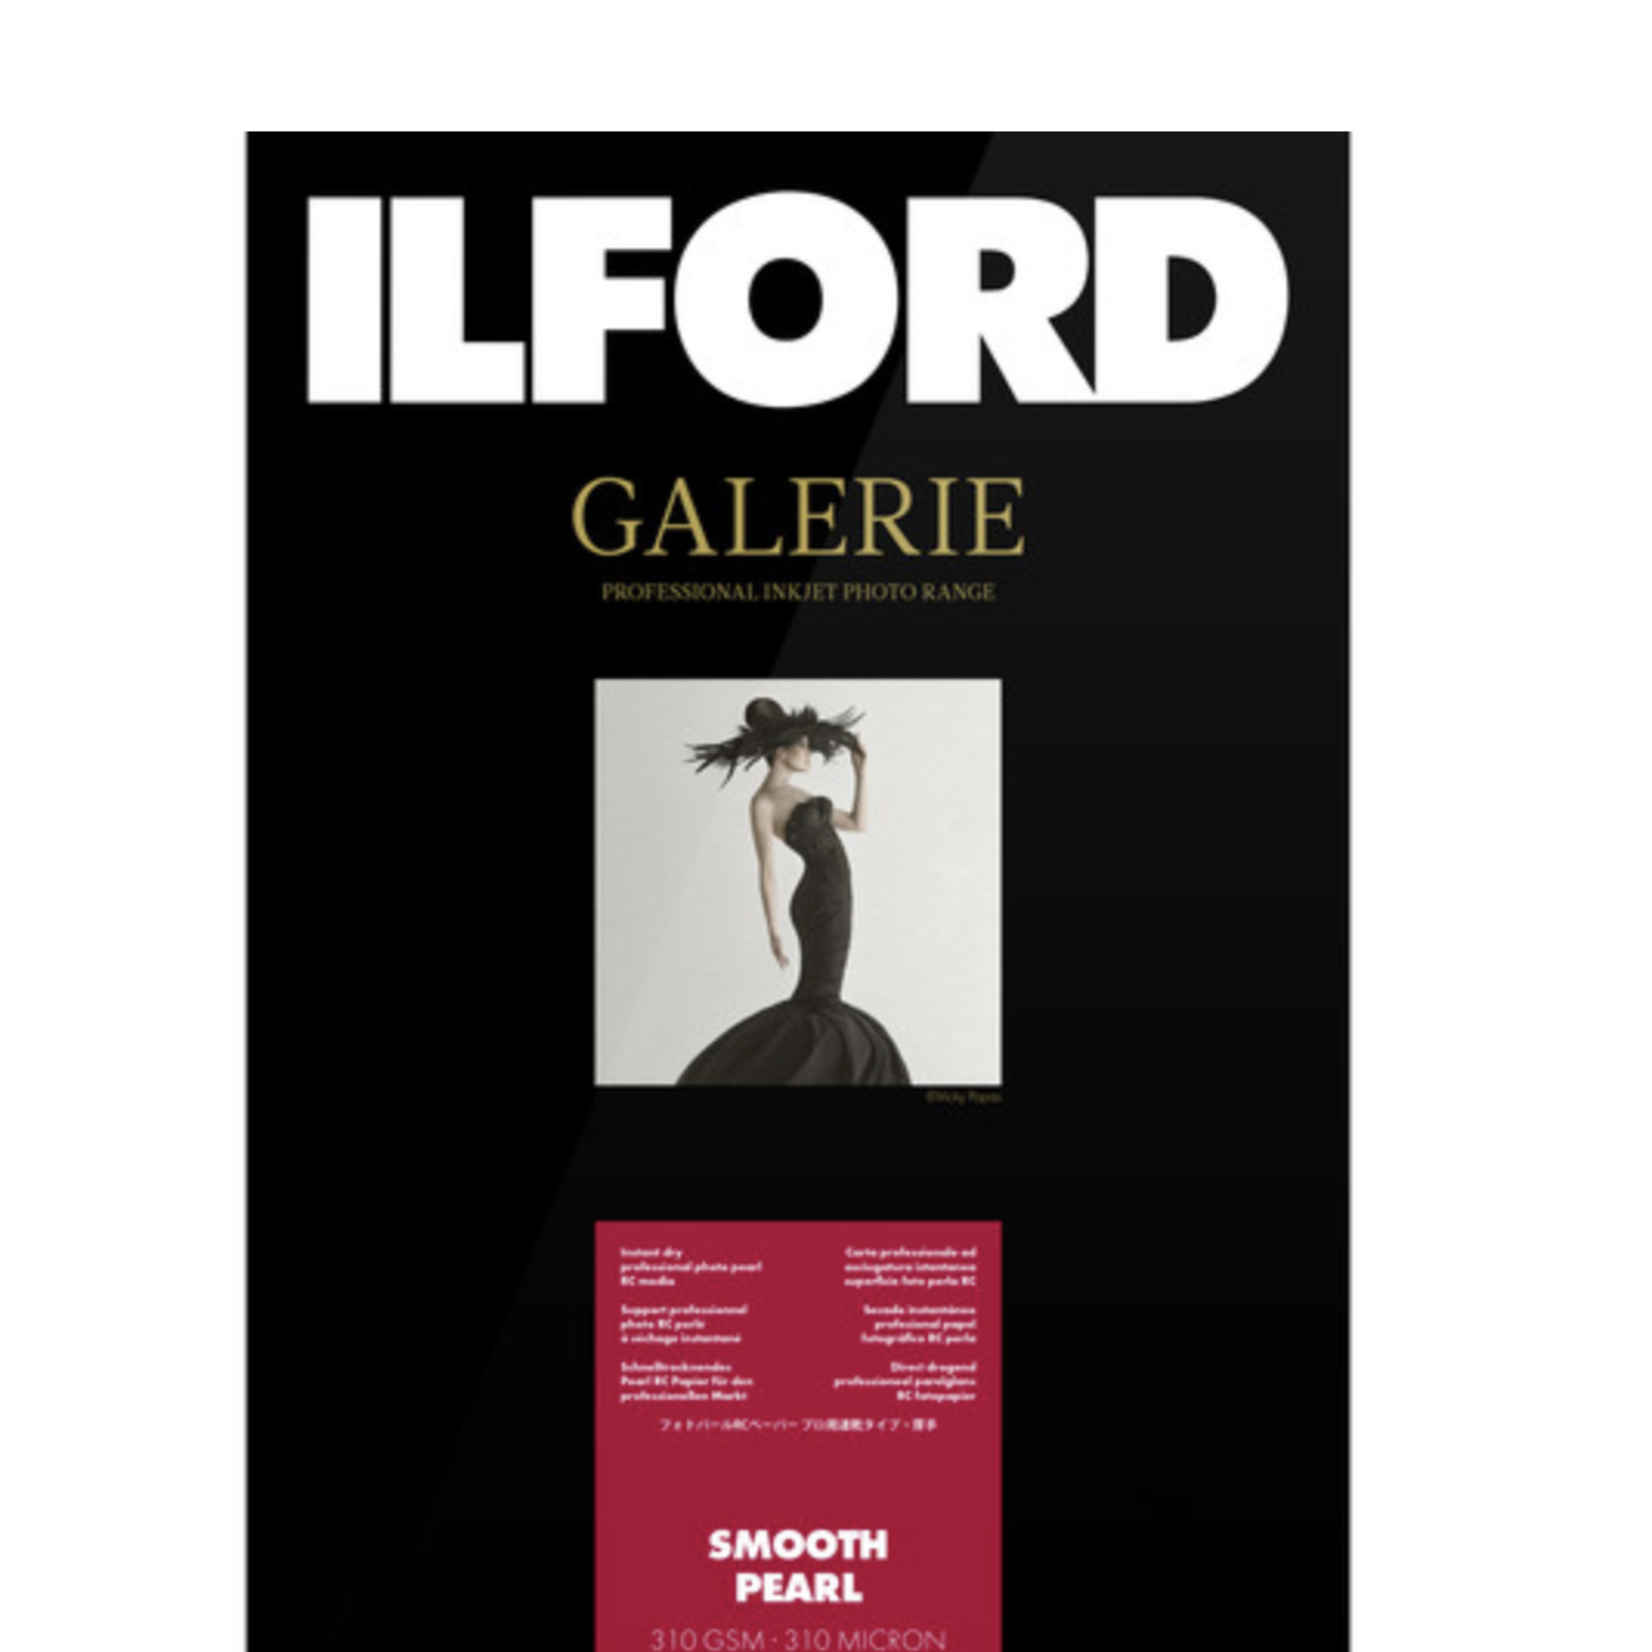 Ilford Ilford Galerie Smooth Pearl (11 x 17", 25 Sheets)